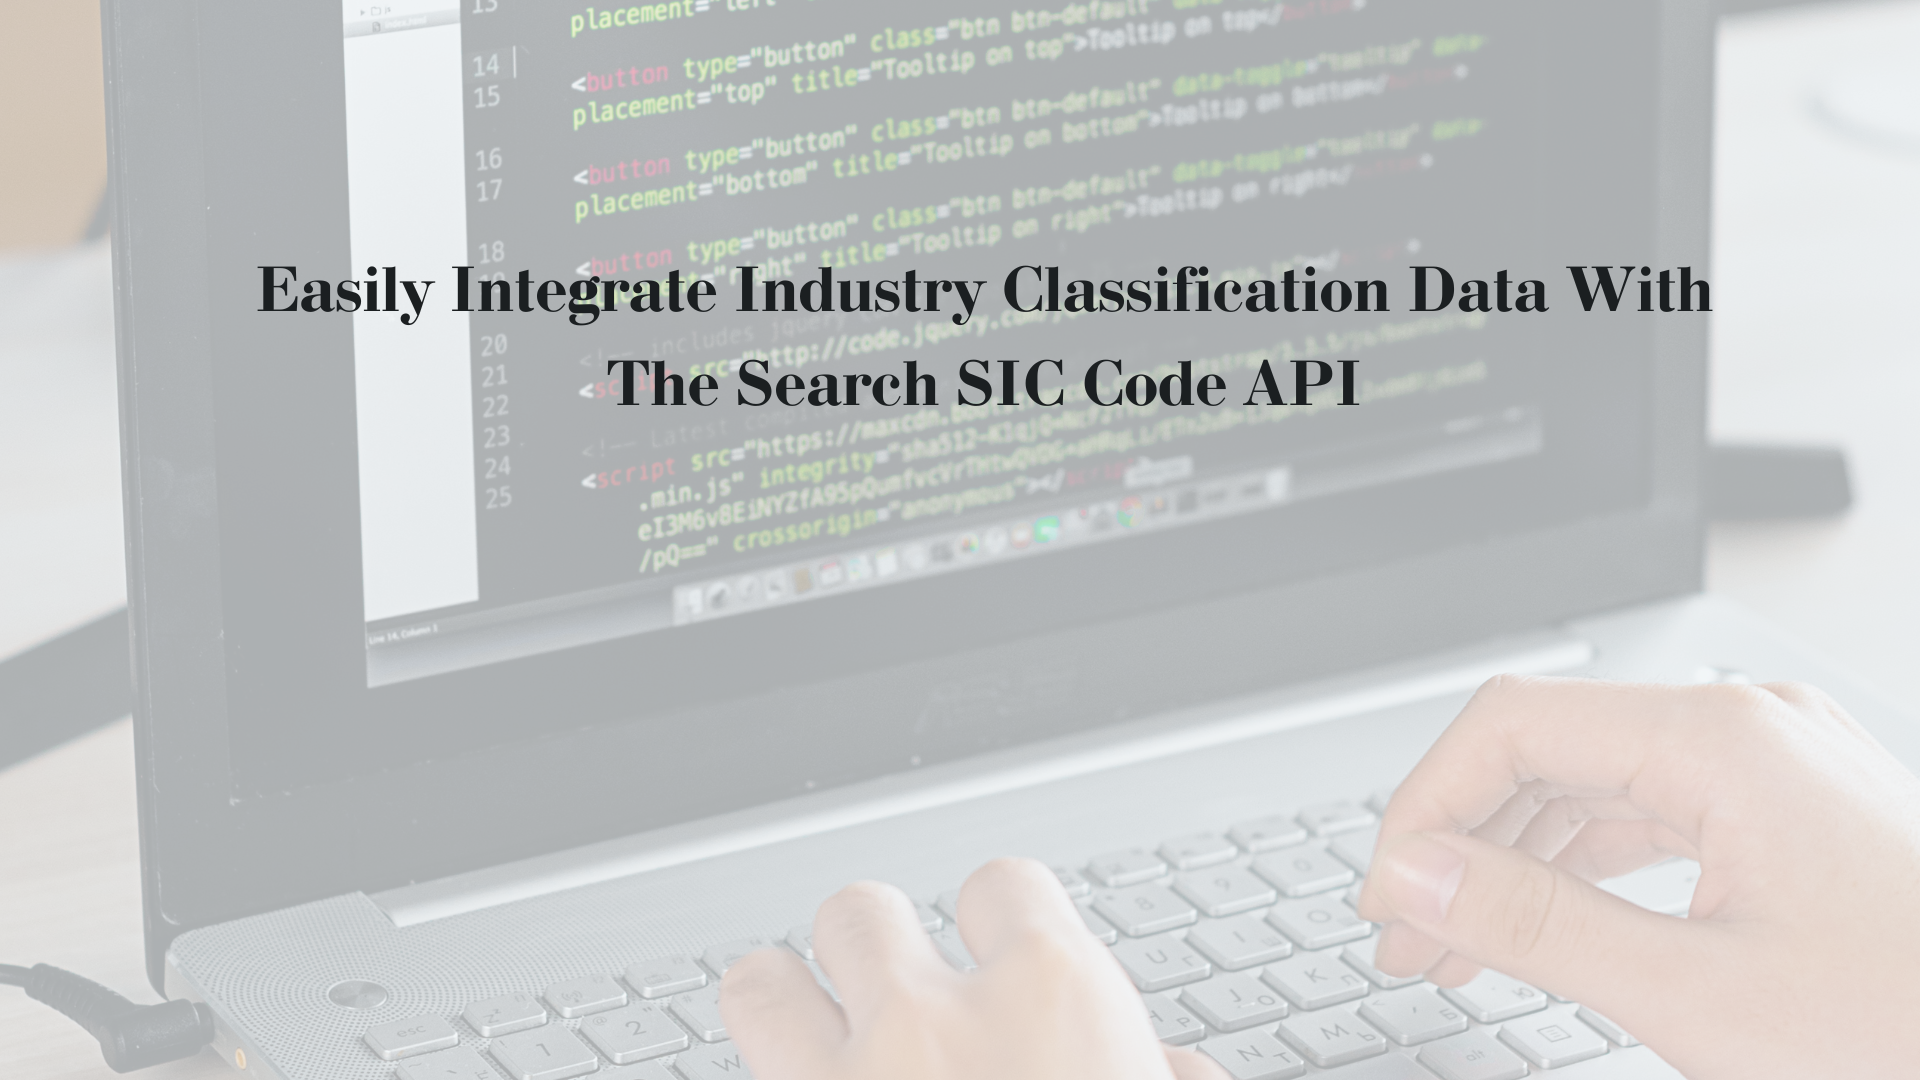 Easily Integrate Industry Classification Data With The Search SIC Code API